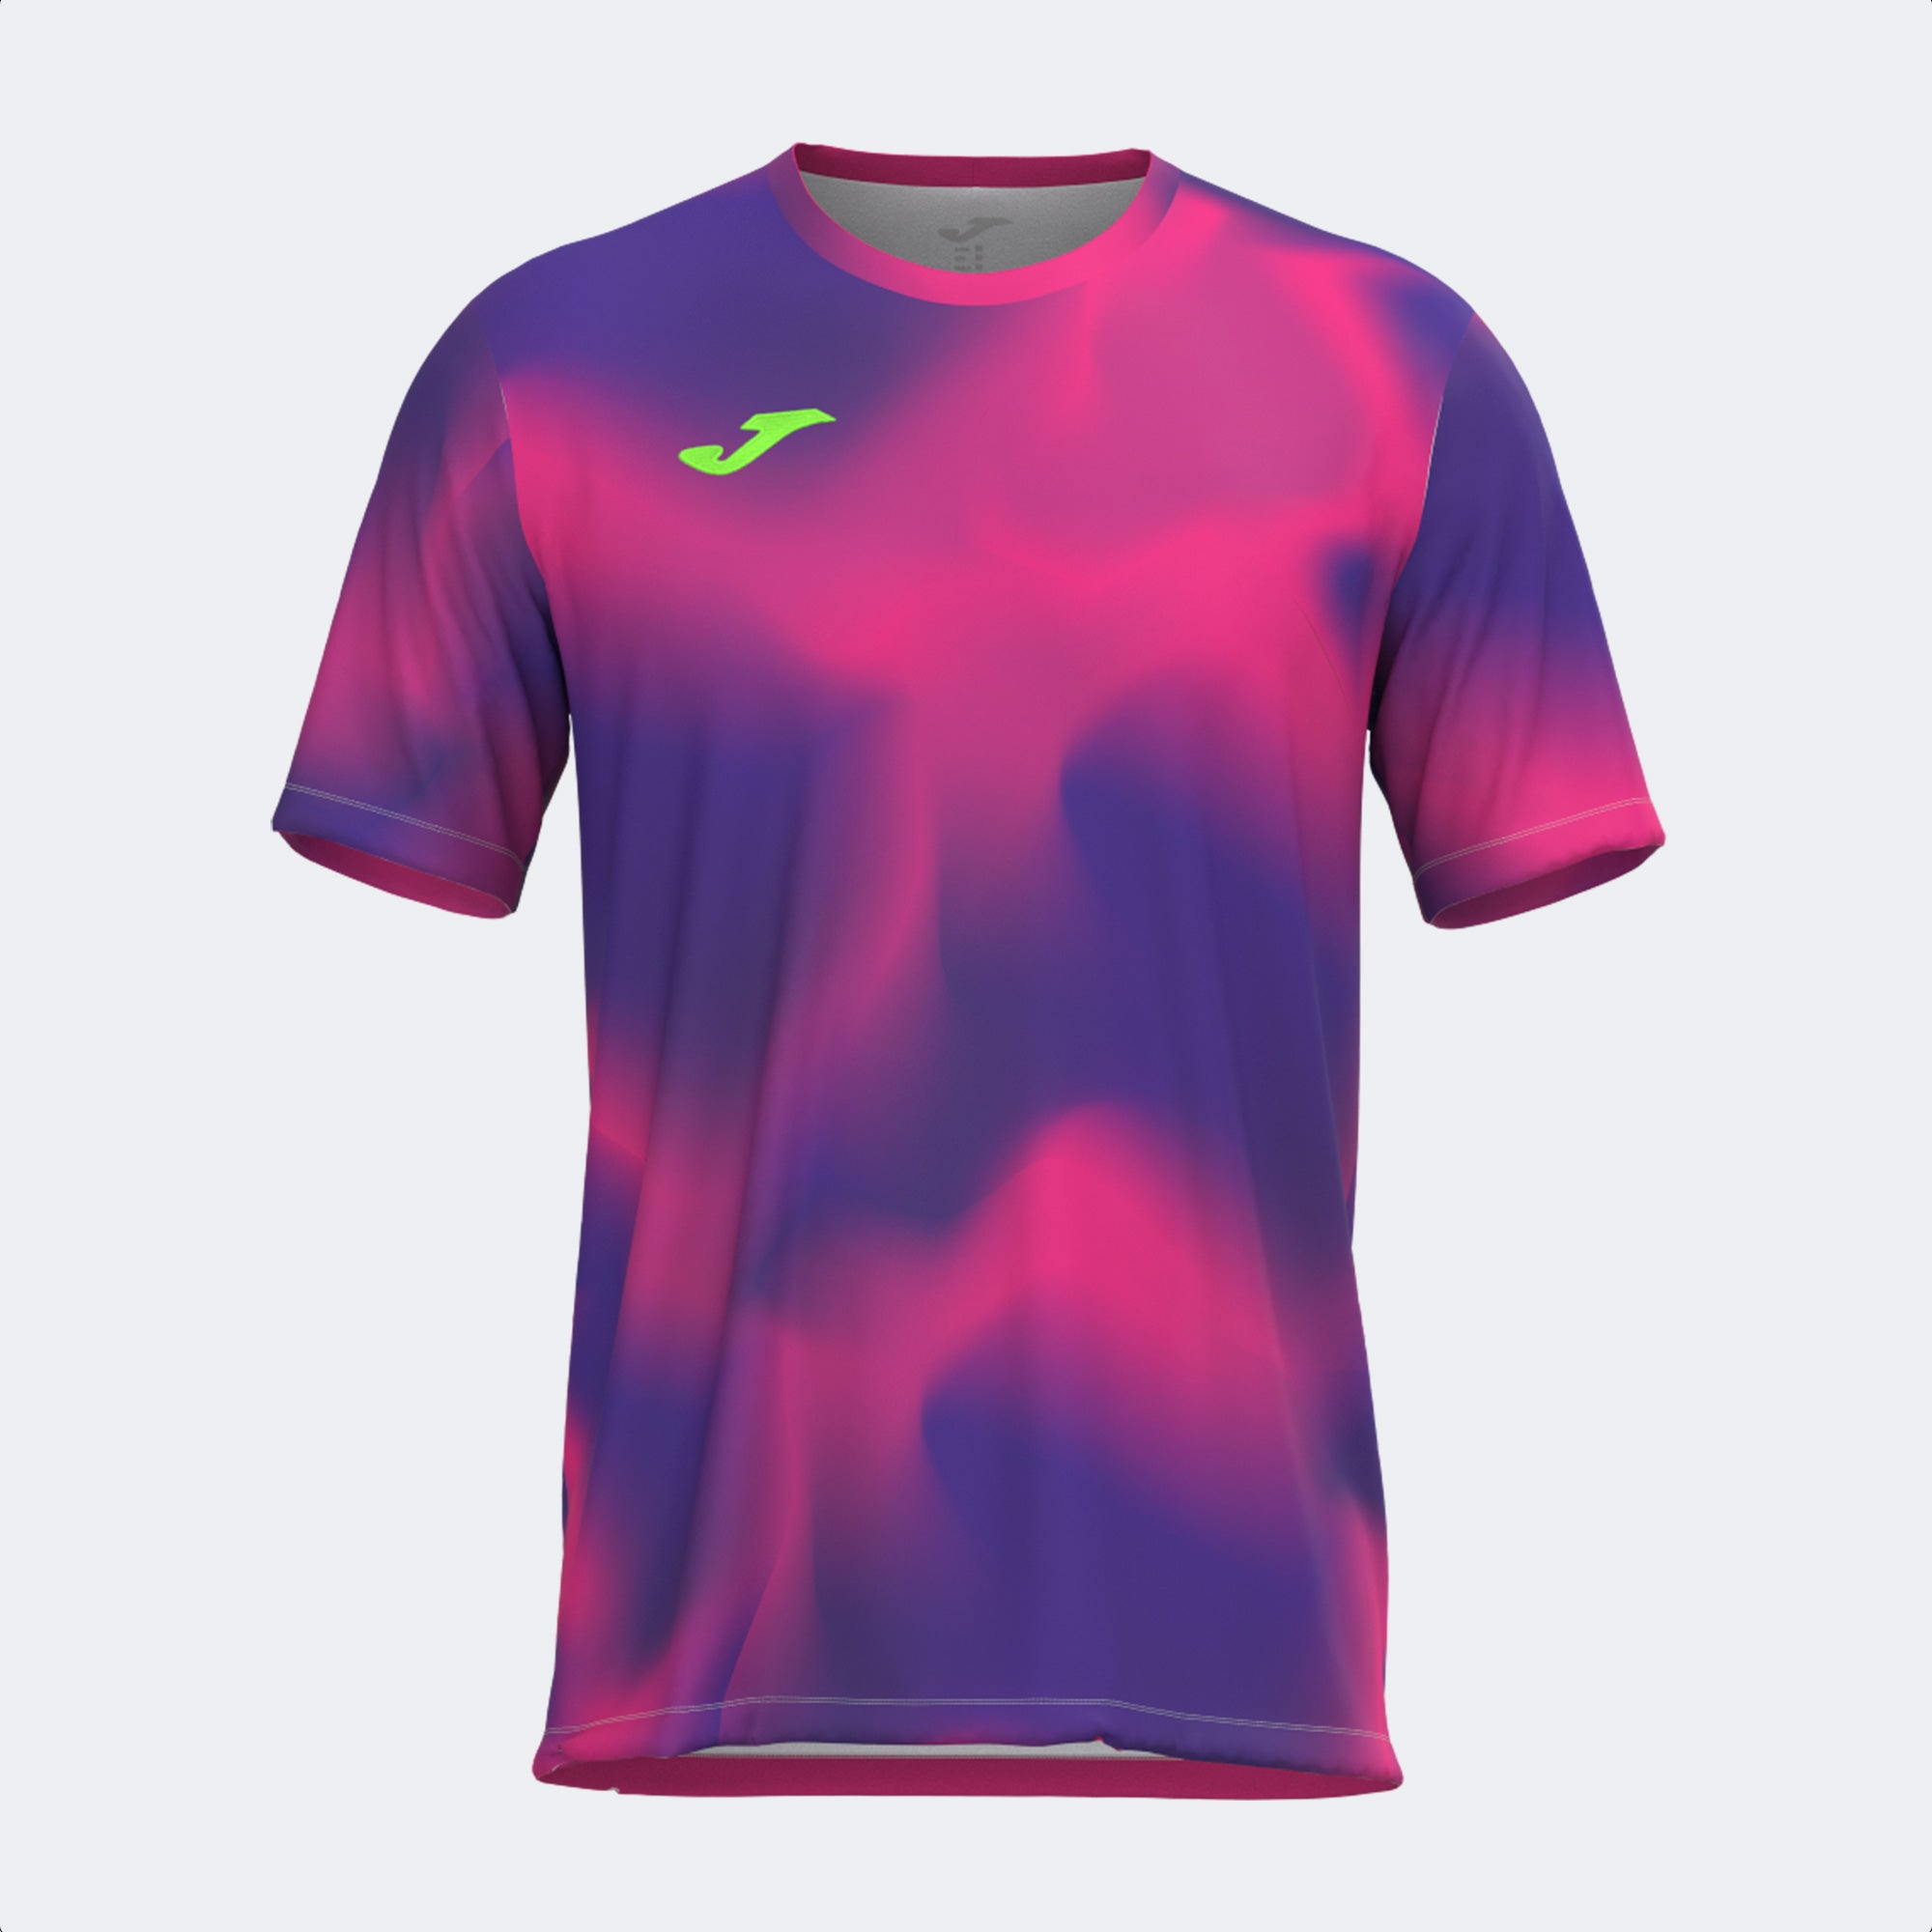 Joma ProTeam Short Sleeved T-Shirt - Violet/Fuxhsia Pink